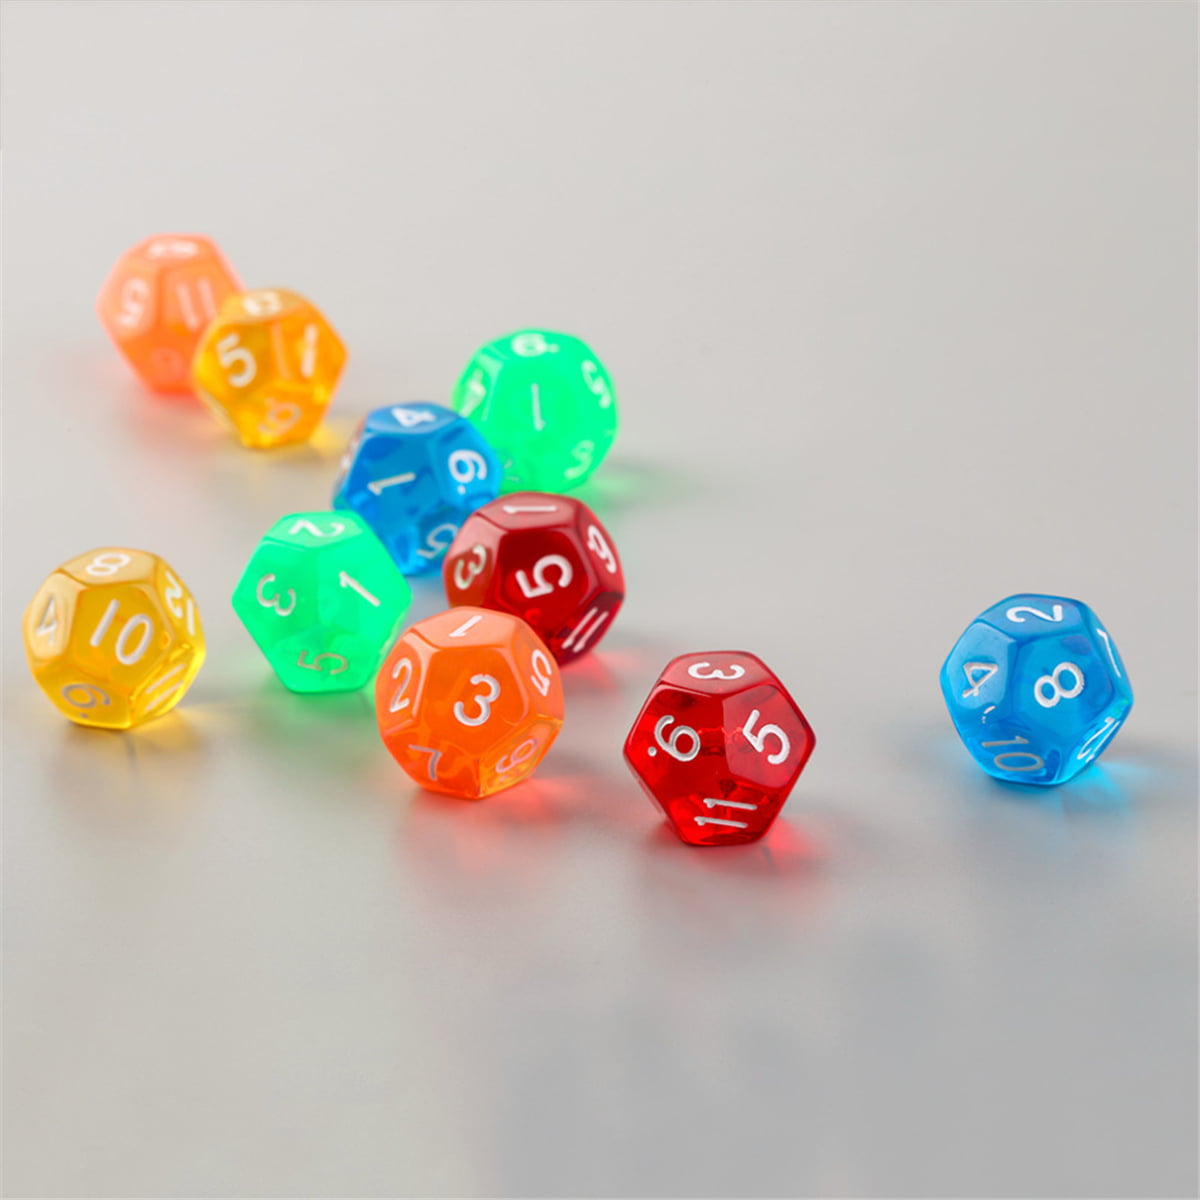 Multi Colored Assortment of D12 Polyhedral Dice 25 Count Assorted Pack of 12 Sided Dice